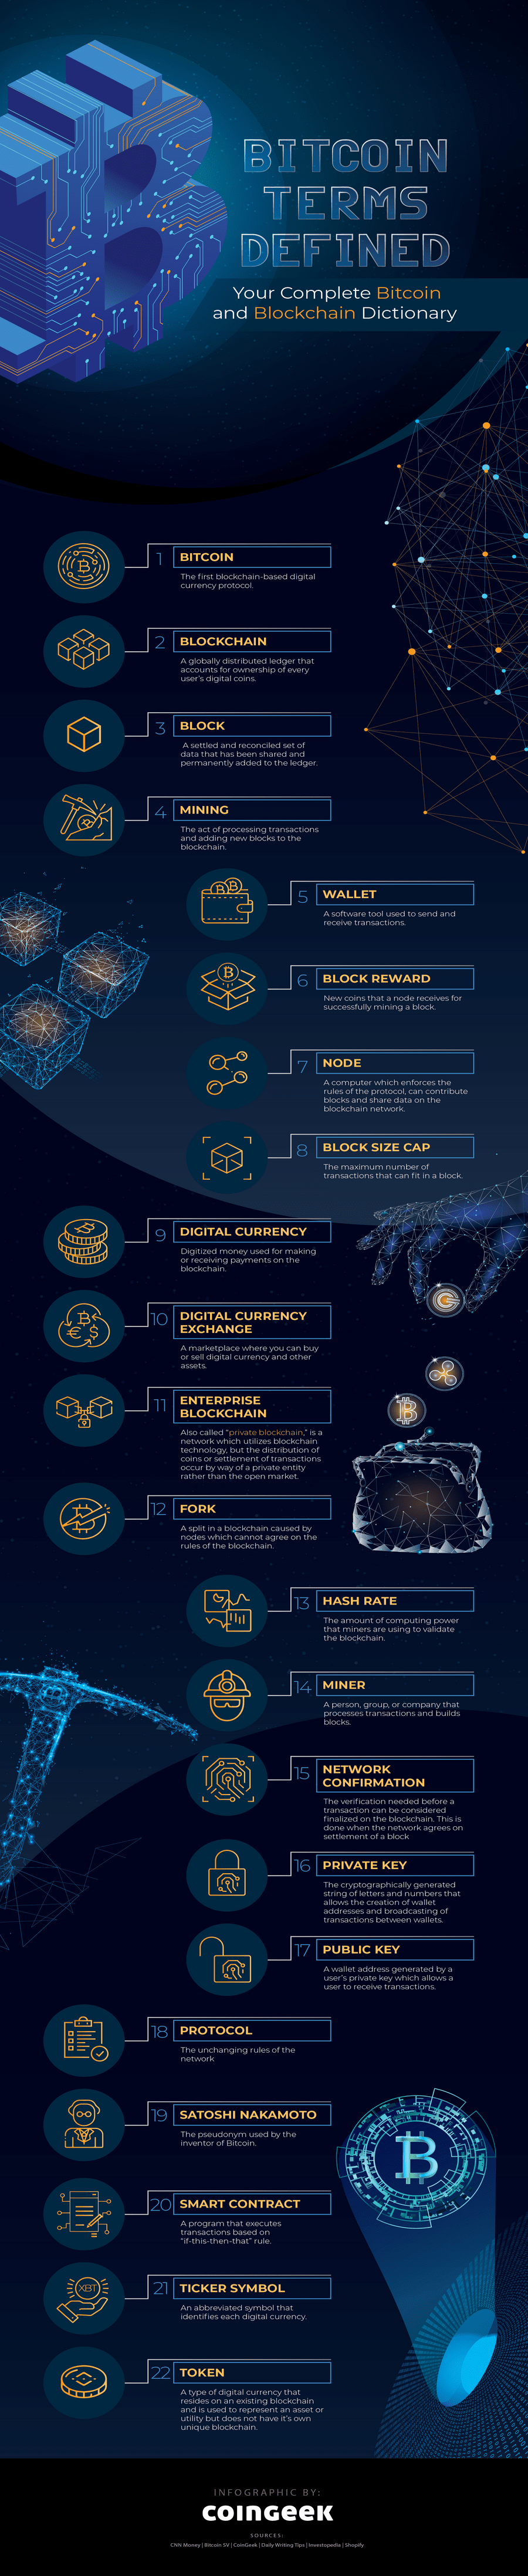 Bitcoin Terms with details in blue background